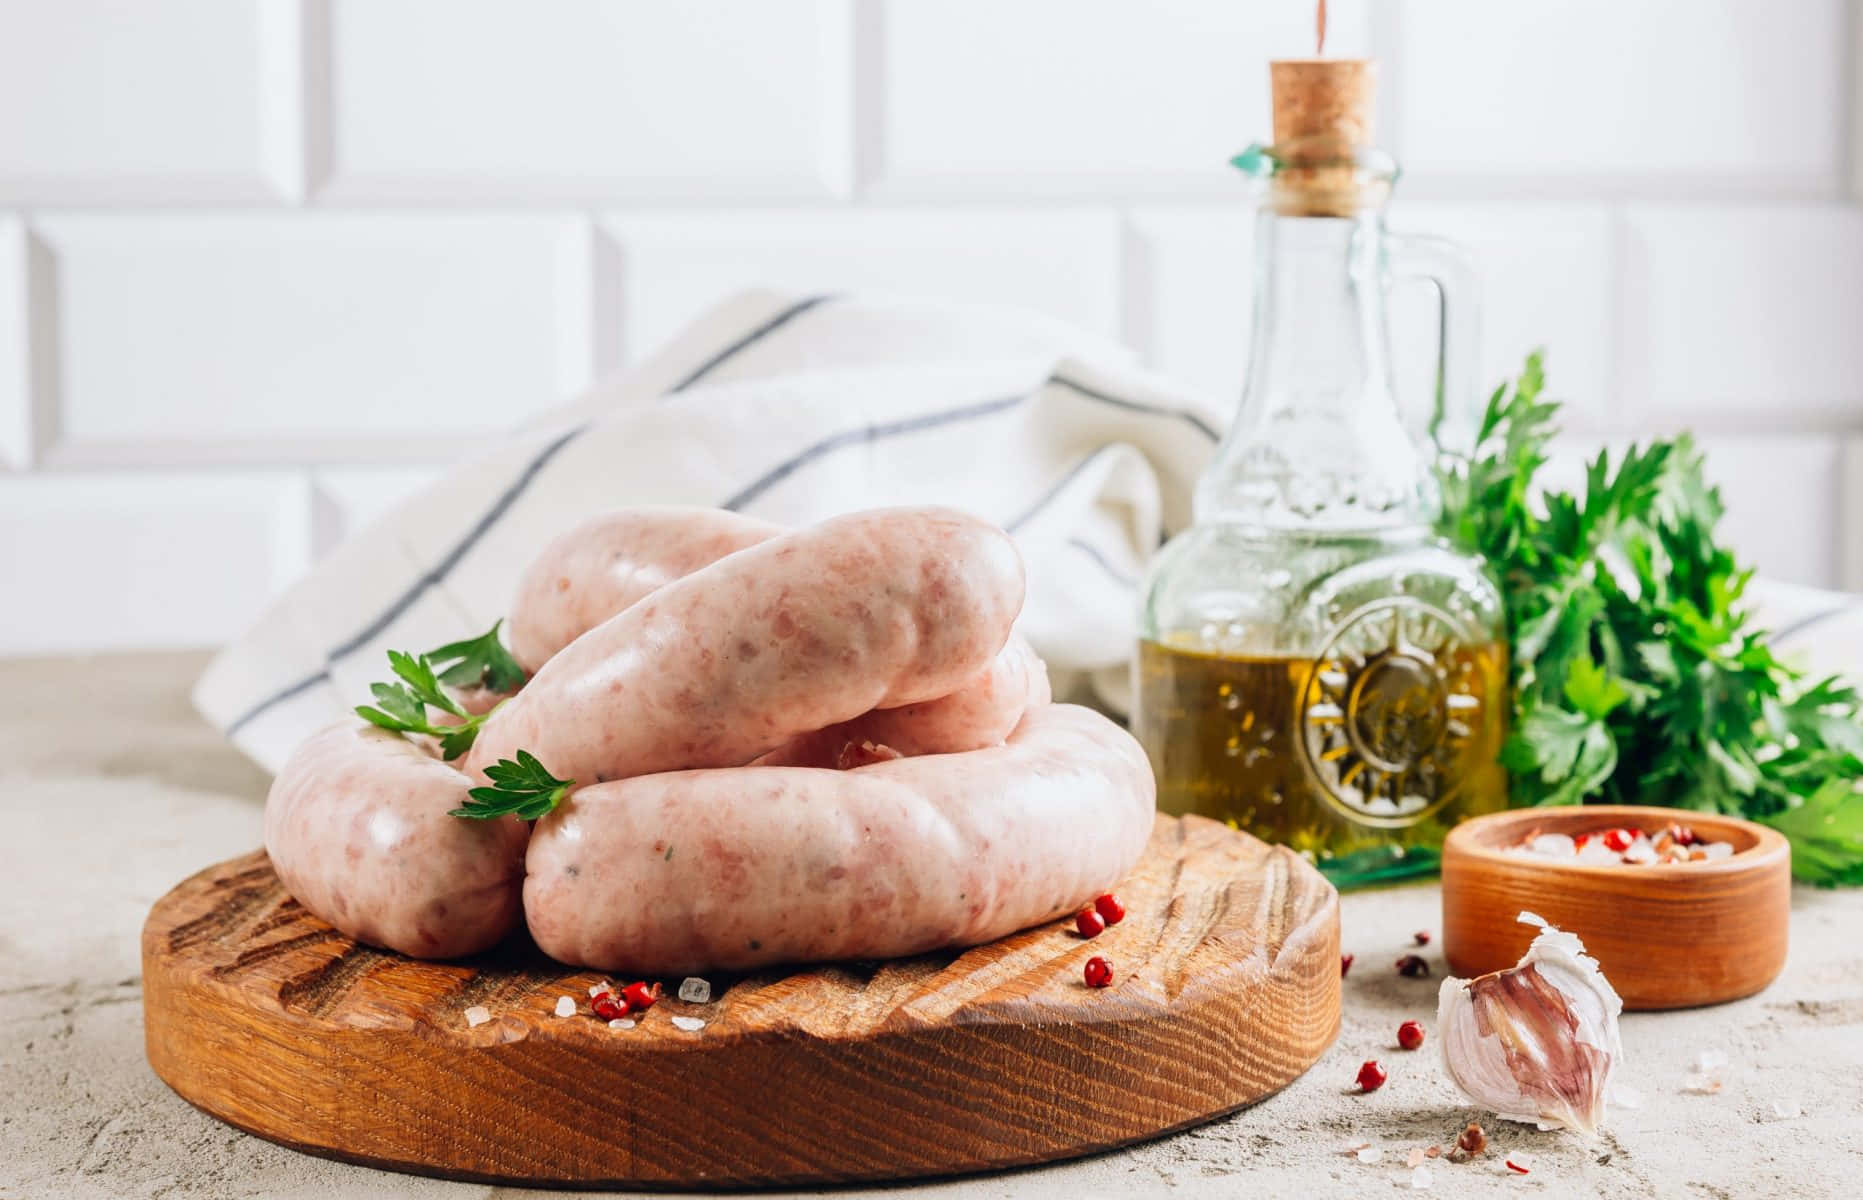 Sausages On A Wooden Cutting Board With Herbs And Garlic